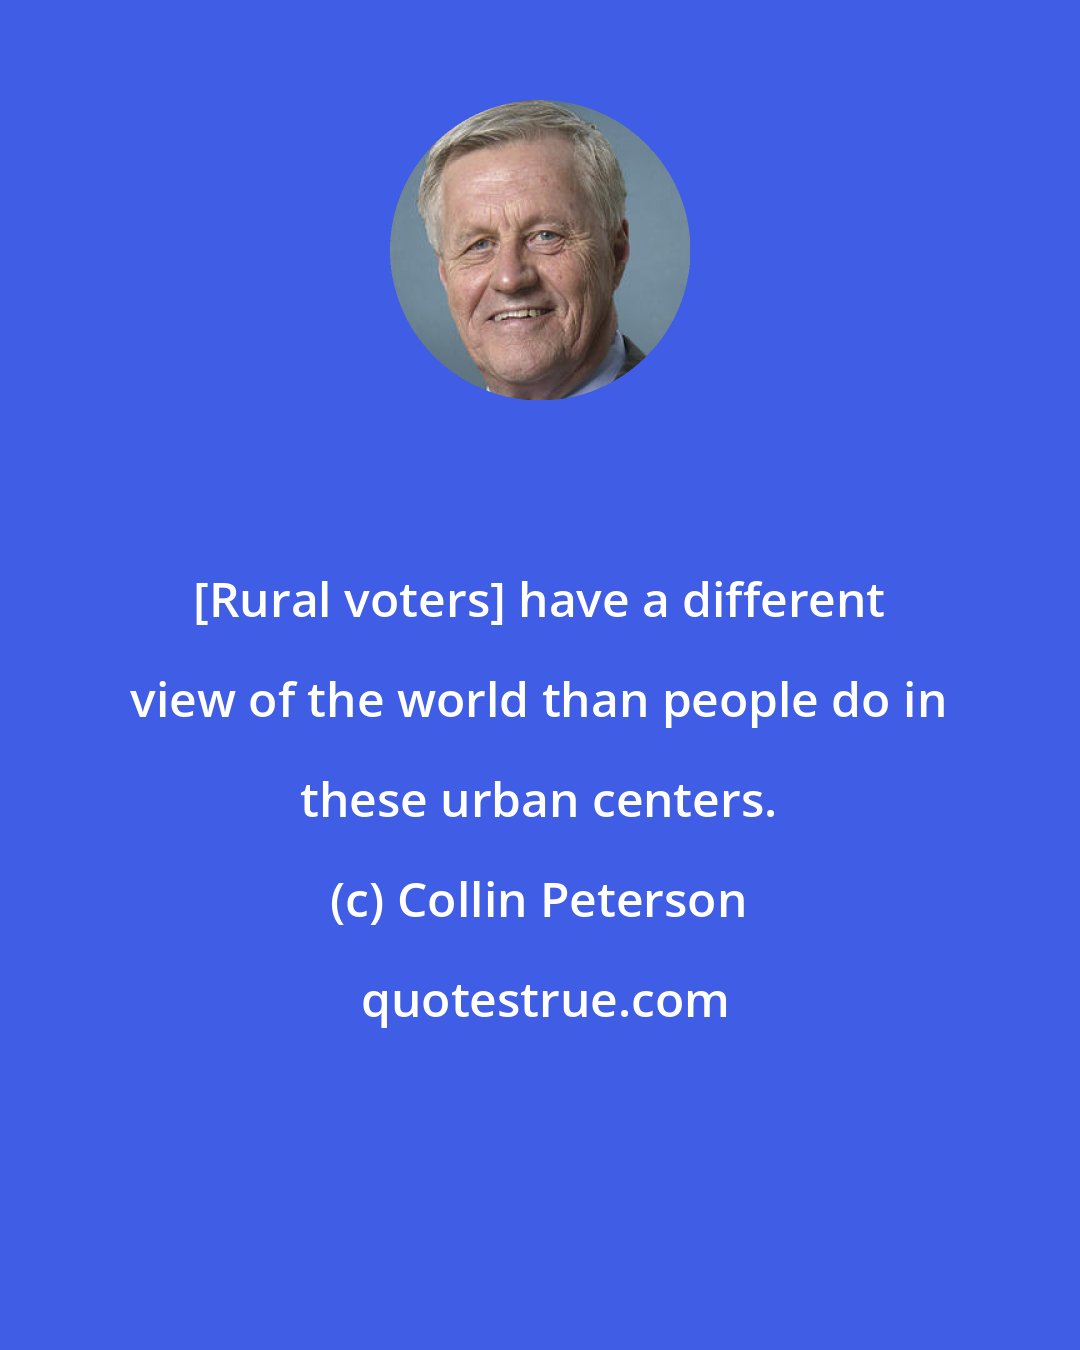 Collin Peterson: [Rural voters] have a different view of the world than people do in these urban centers.